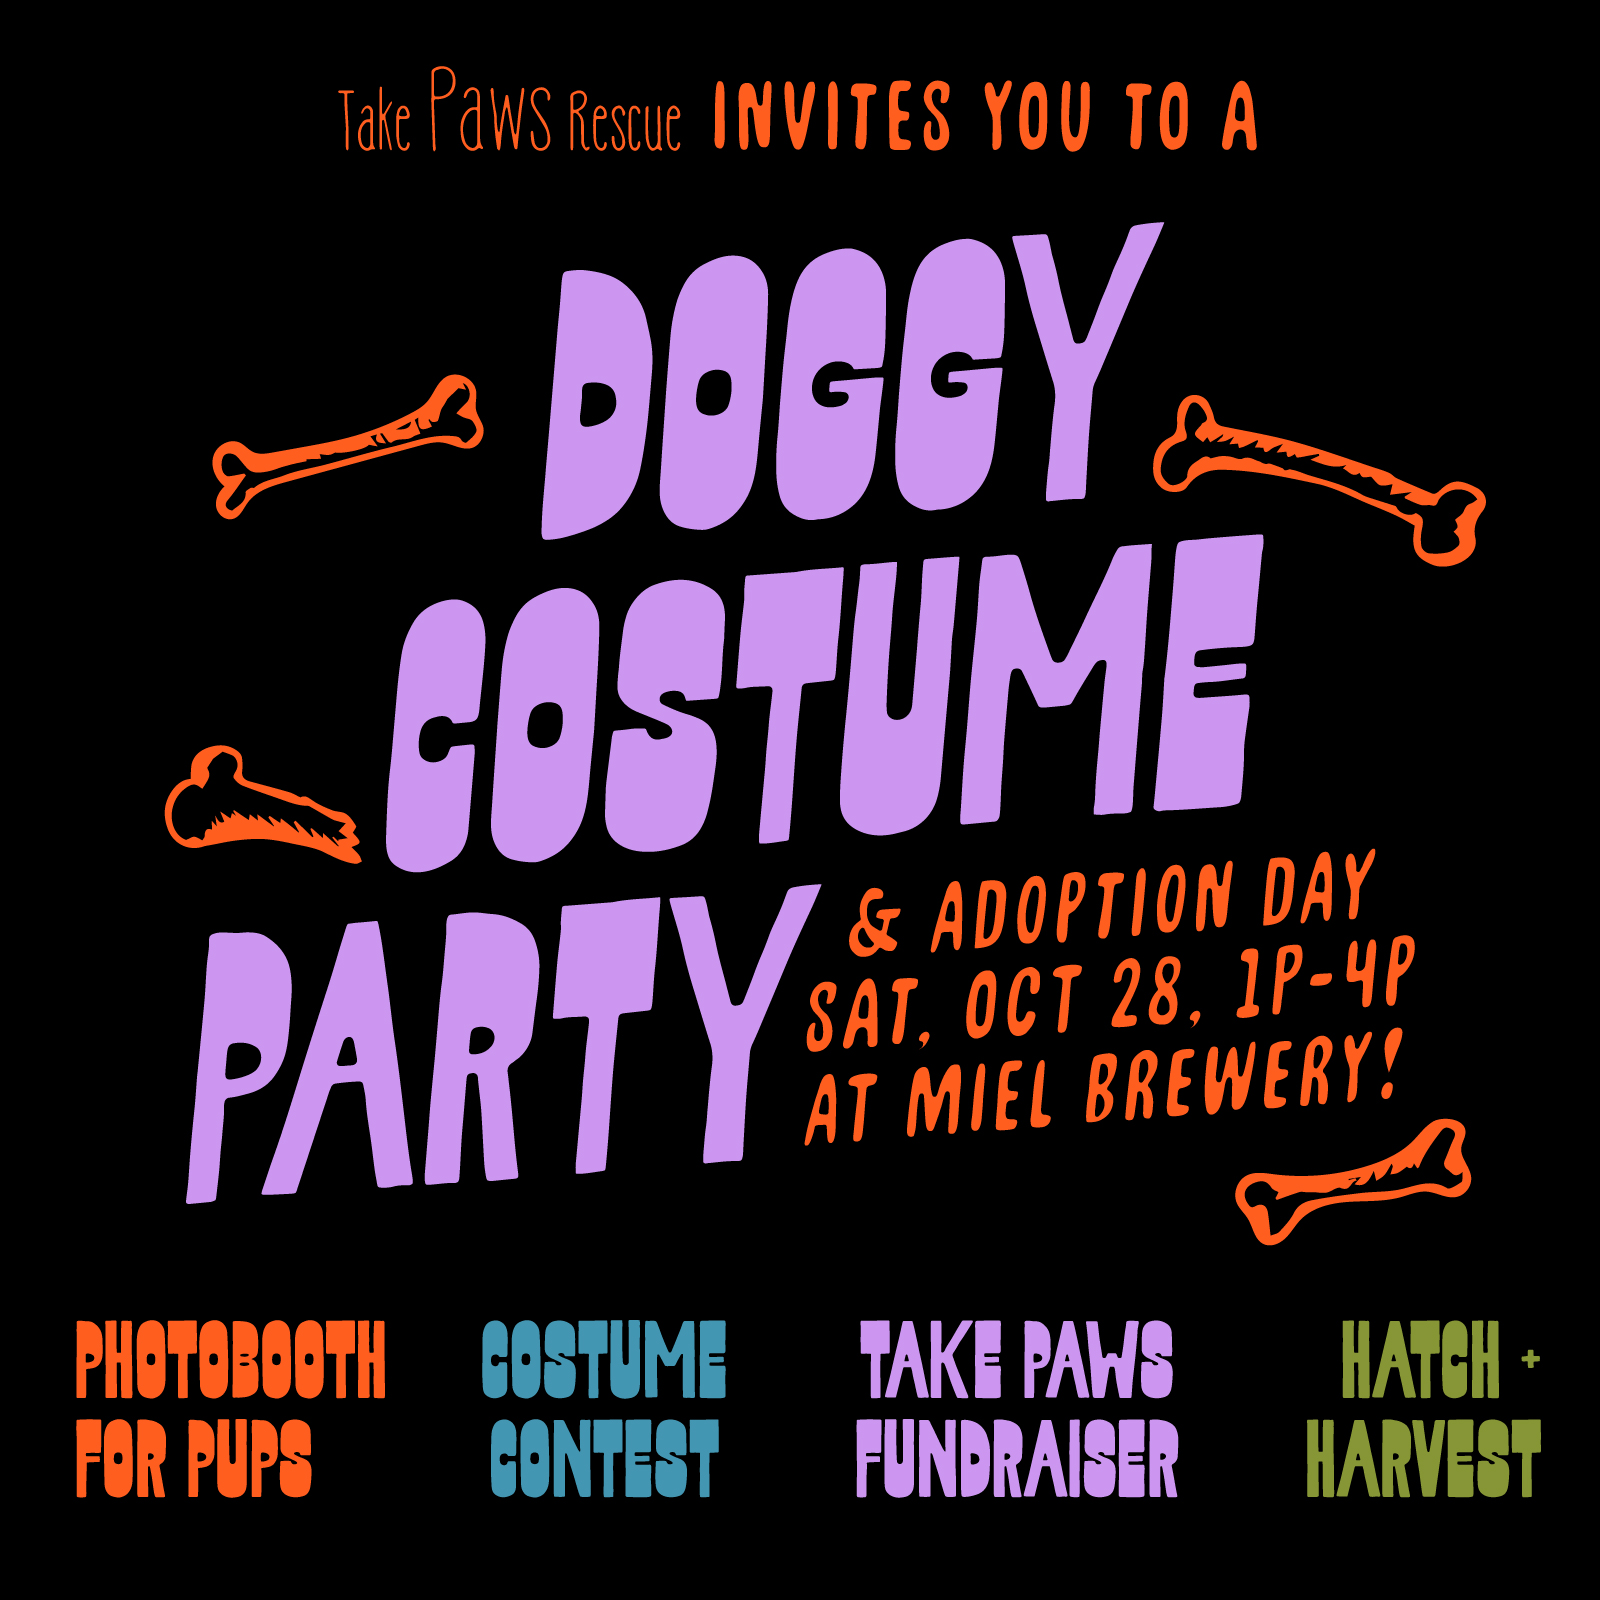 Flyer for the Doggy Costume Party